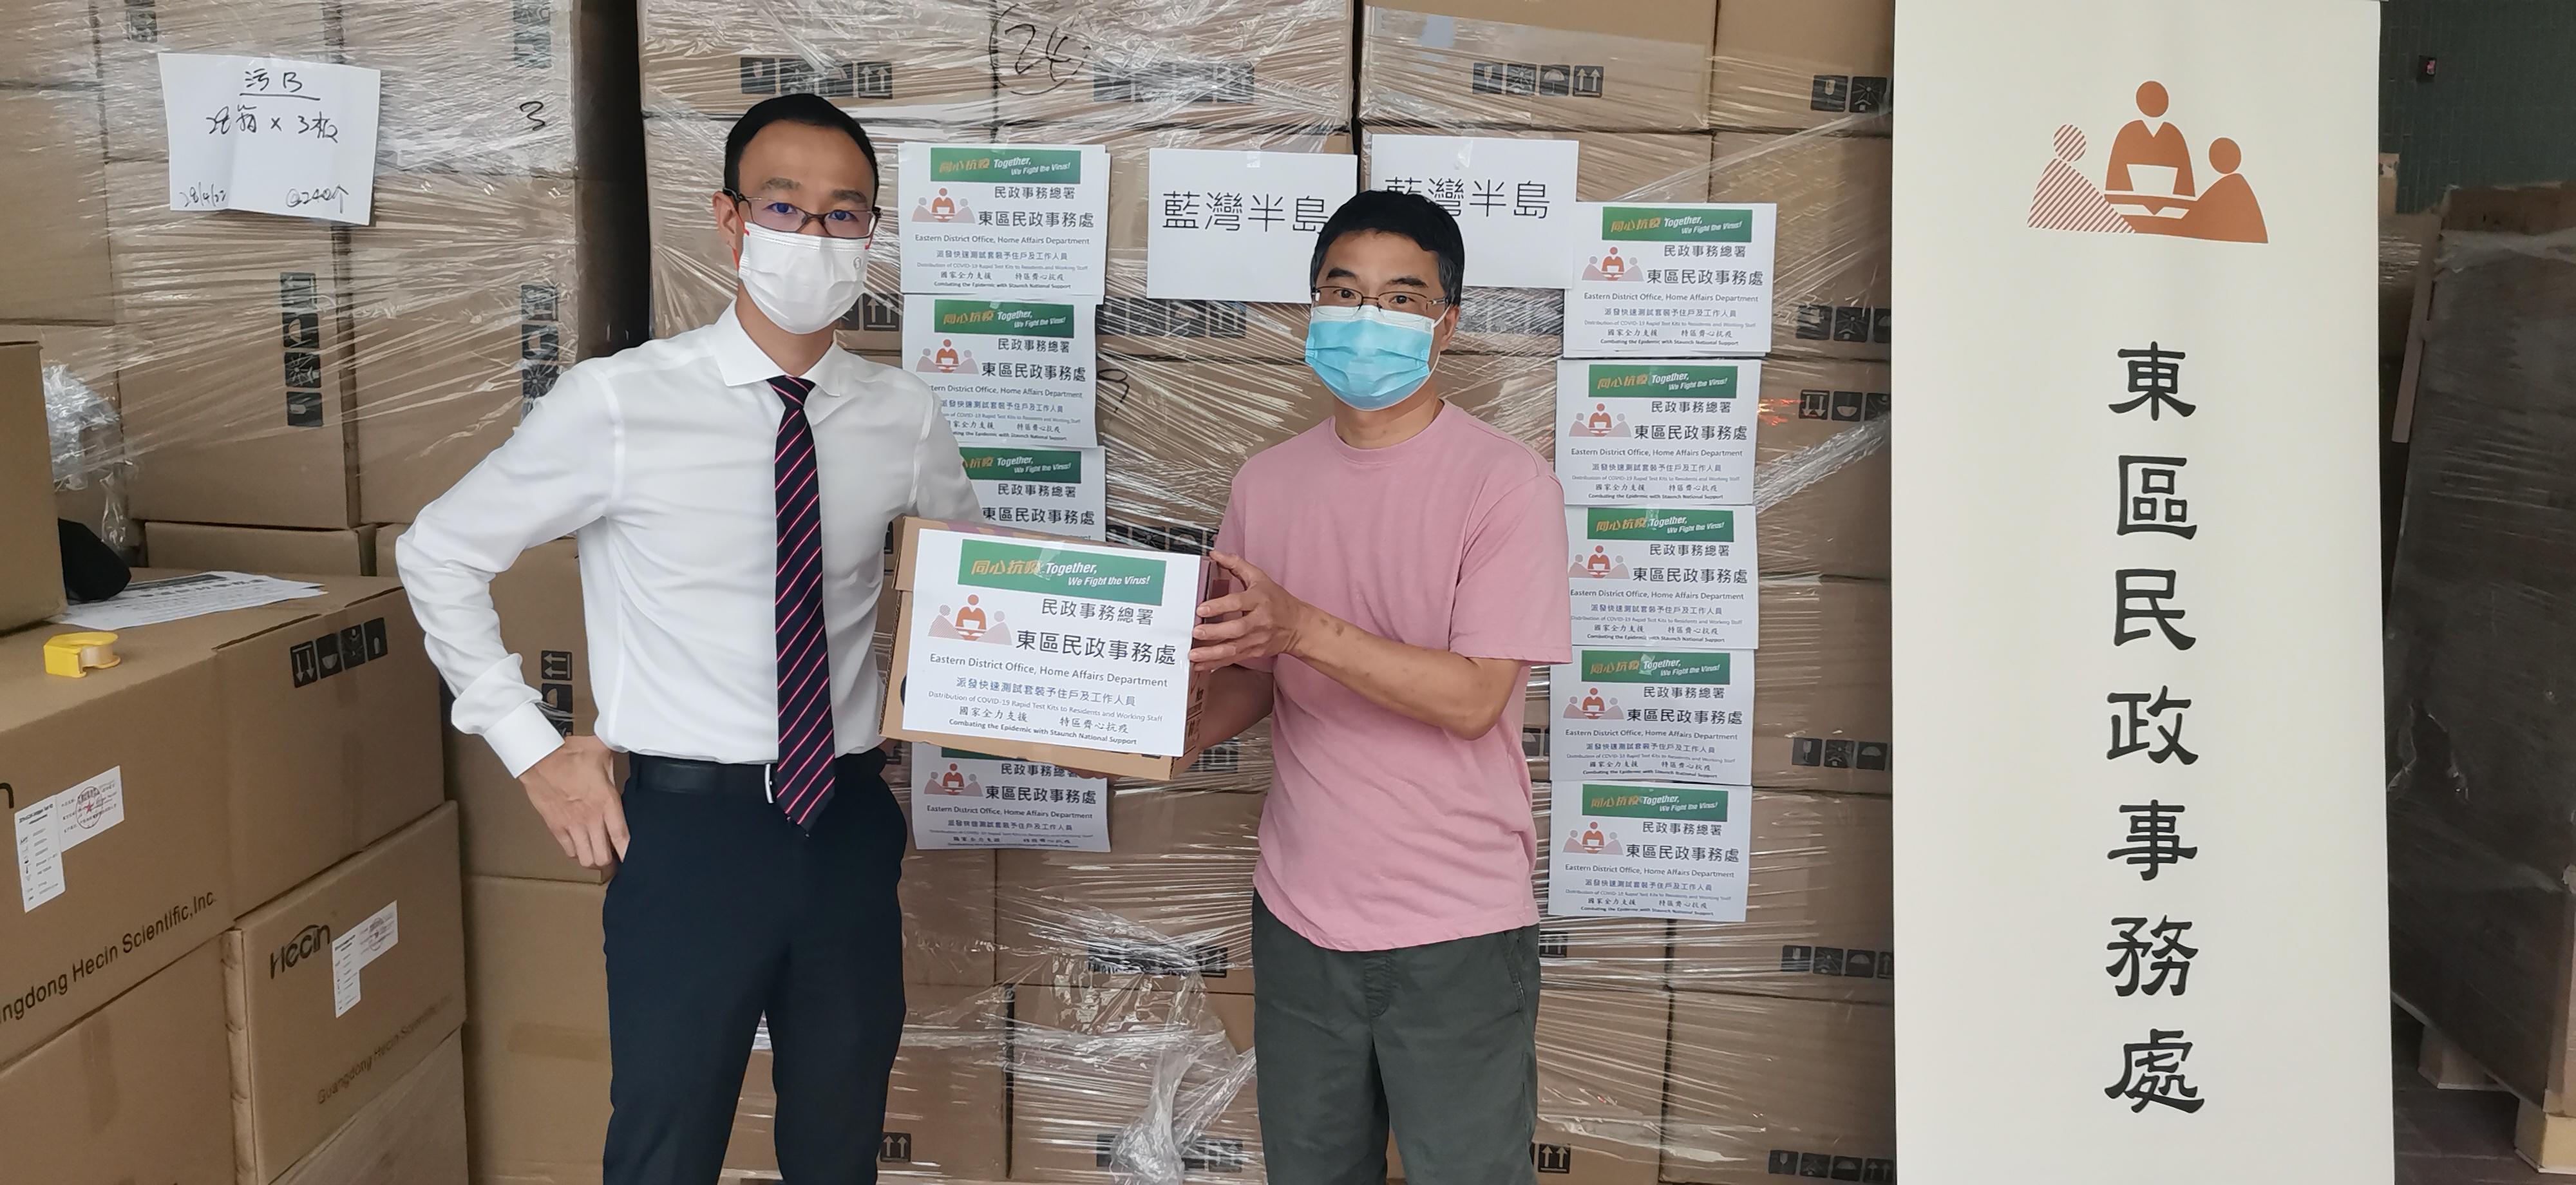 The Eastern District Office today (May 10) distributed COVID-19 rapid test kits to households, cleansing workers and property management staff living and working in Island Resort for voluntary testing through the property management company.